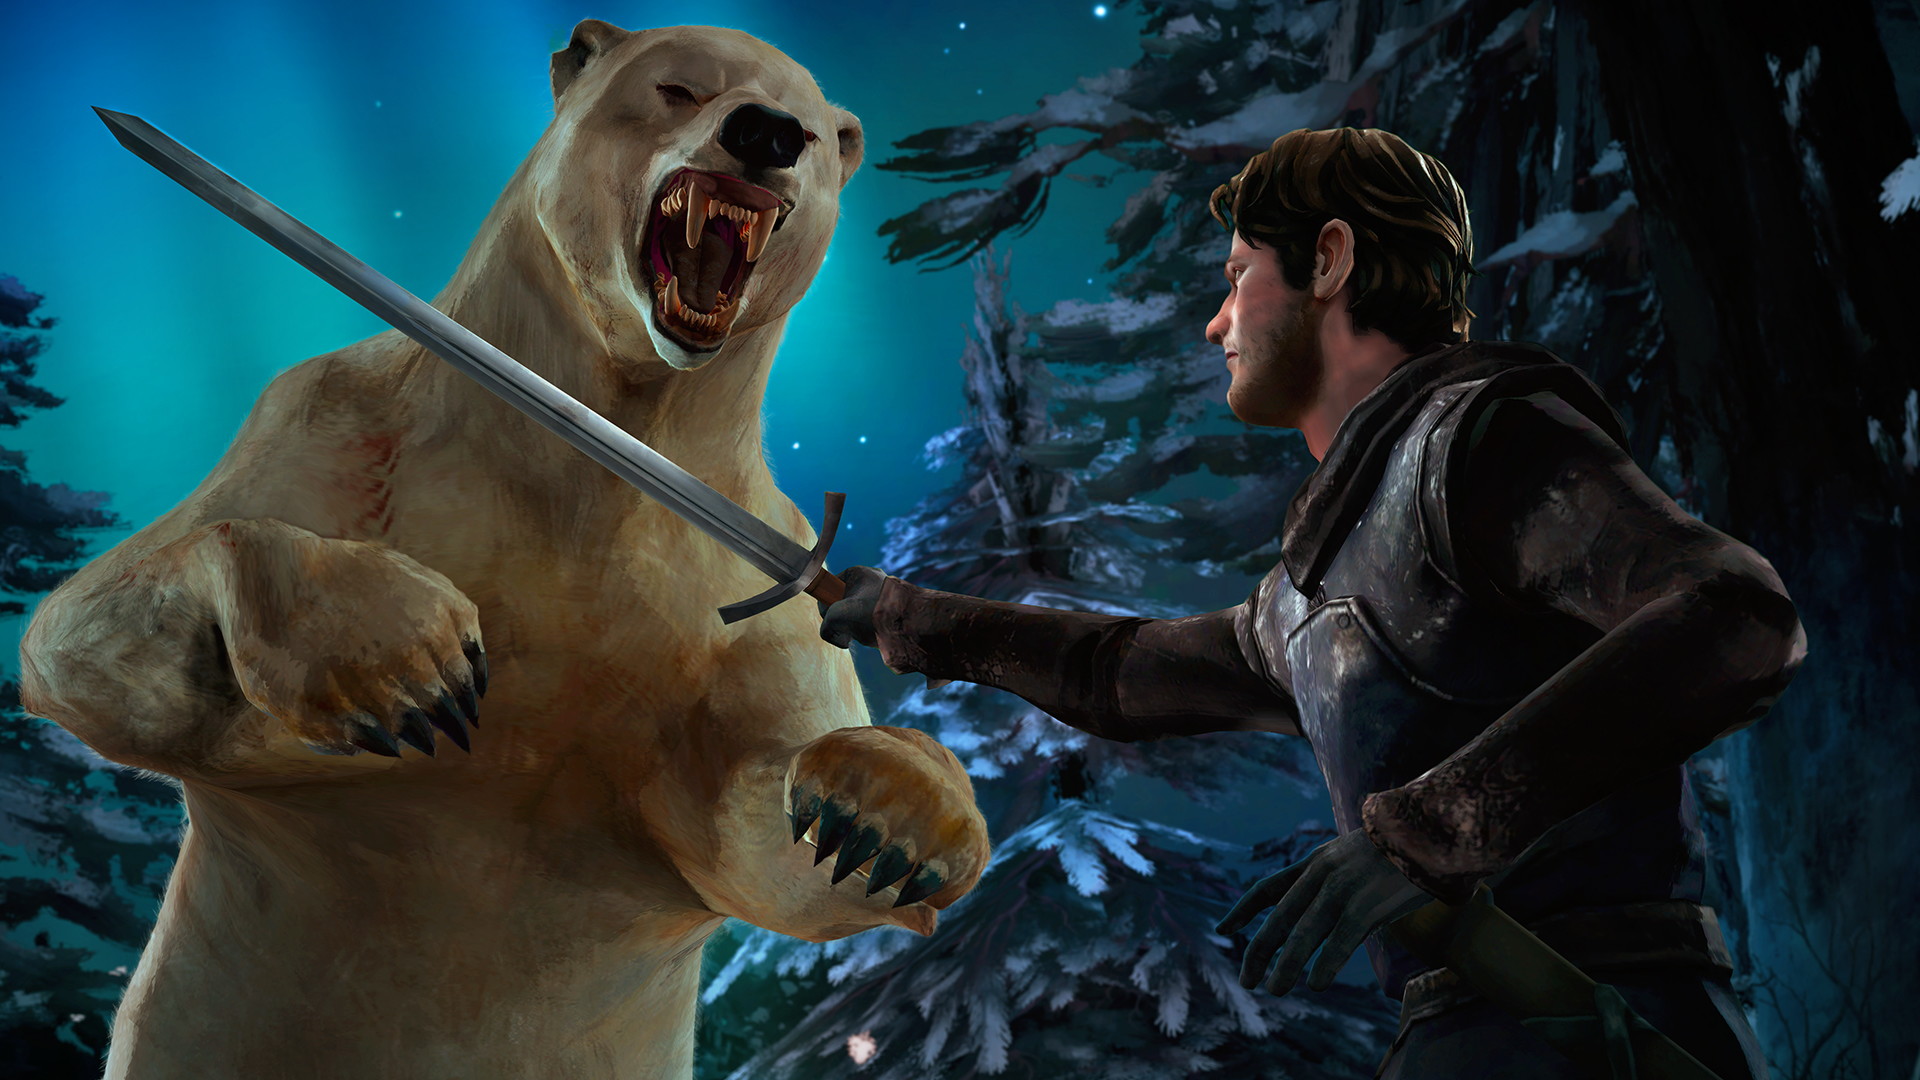 Game of Thrones: A Telltale Games Series - Episode 6: The Ice Dragon - screenshot 4